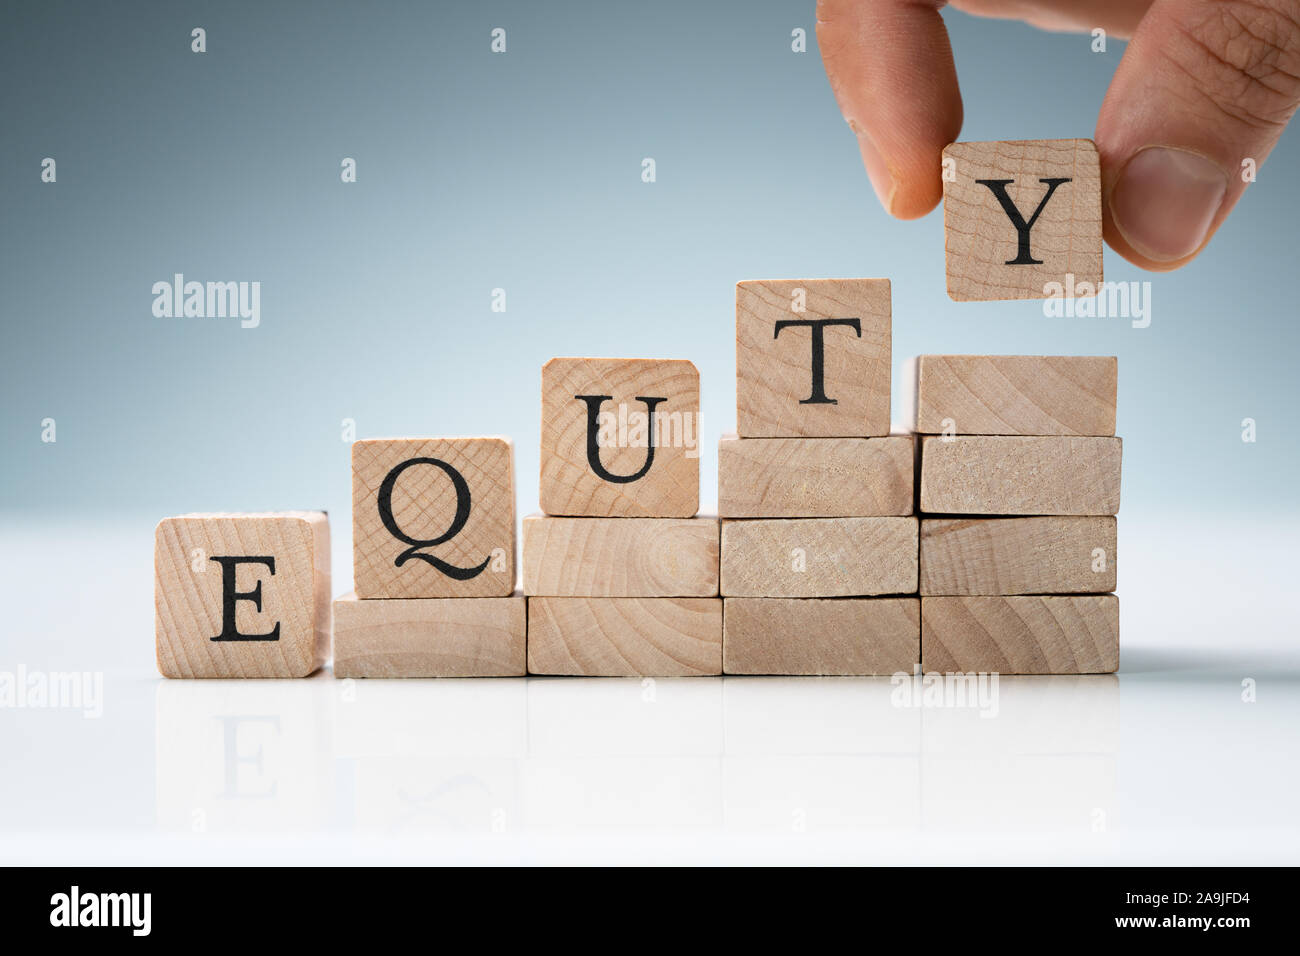 Human Hand Arranging Stack Of Wooden Blocks In A Row Showing Equity Text Stock Photo